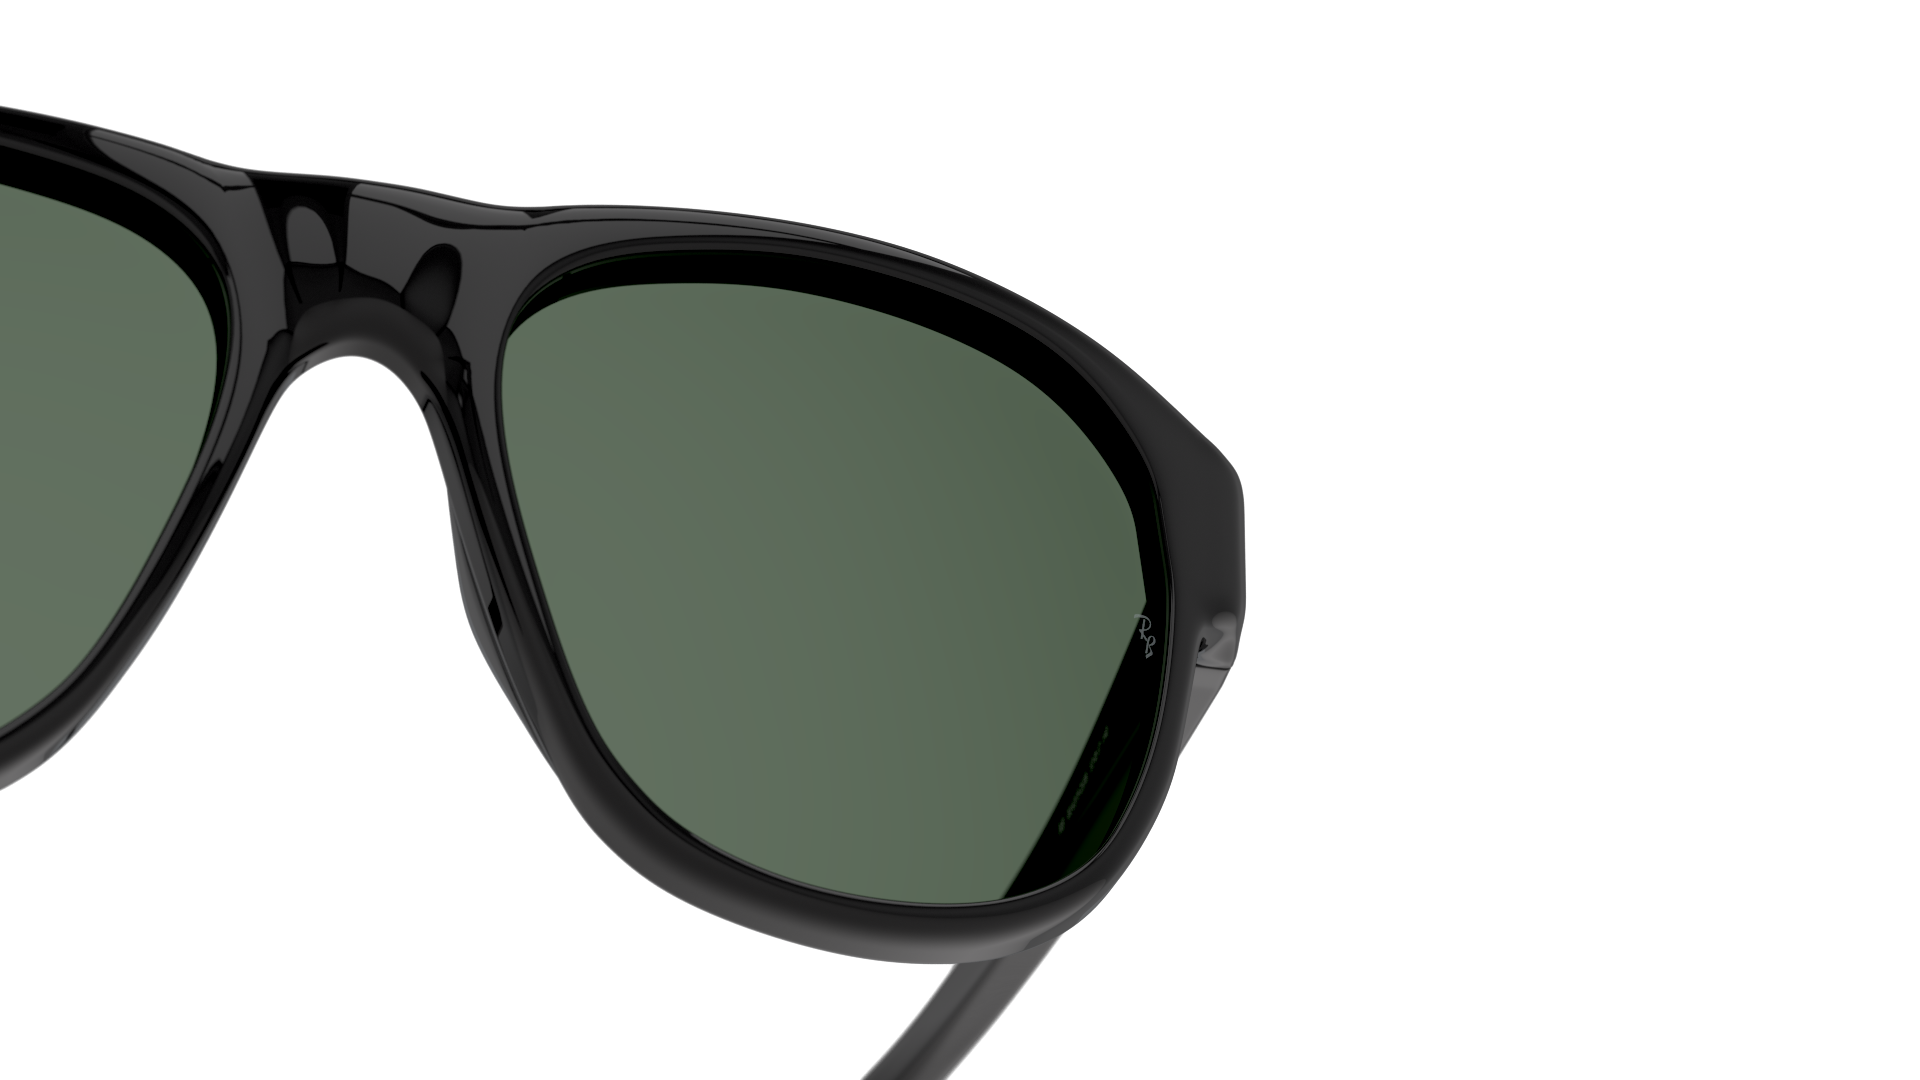 Detail01 Ray-Ban 0RB4351 601/71 Verde / Nero